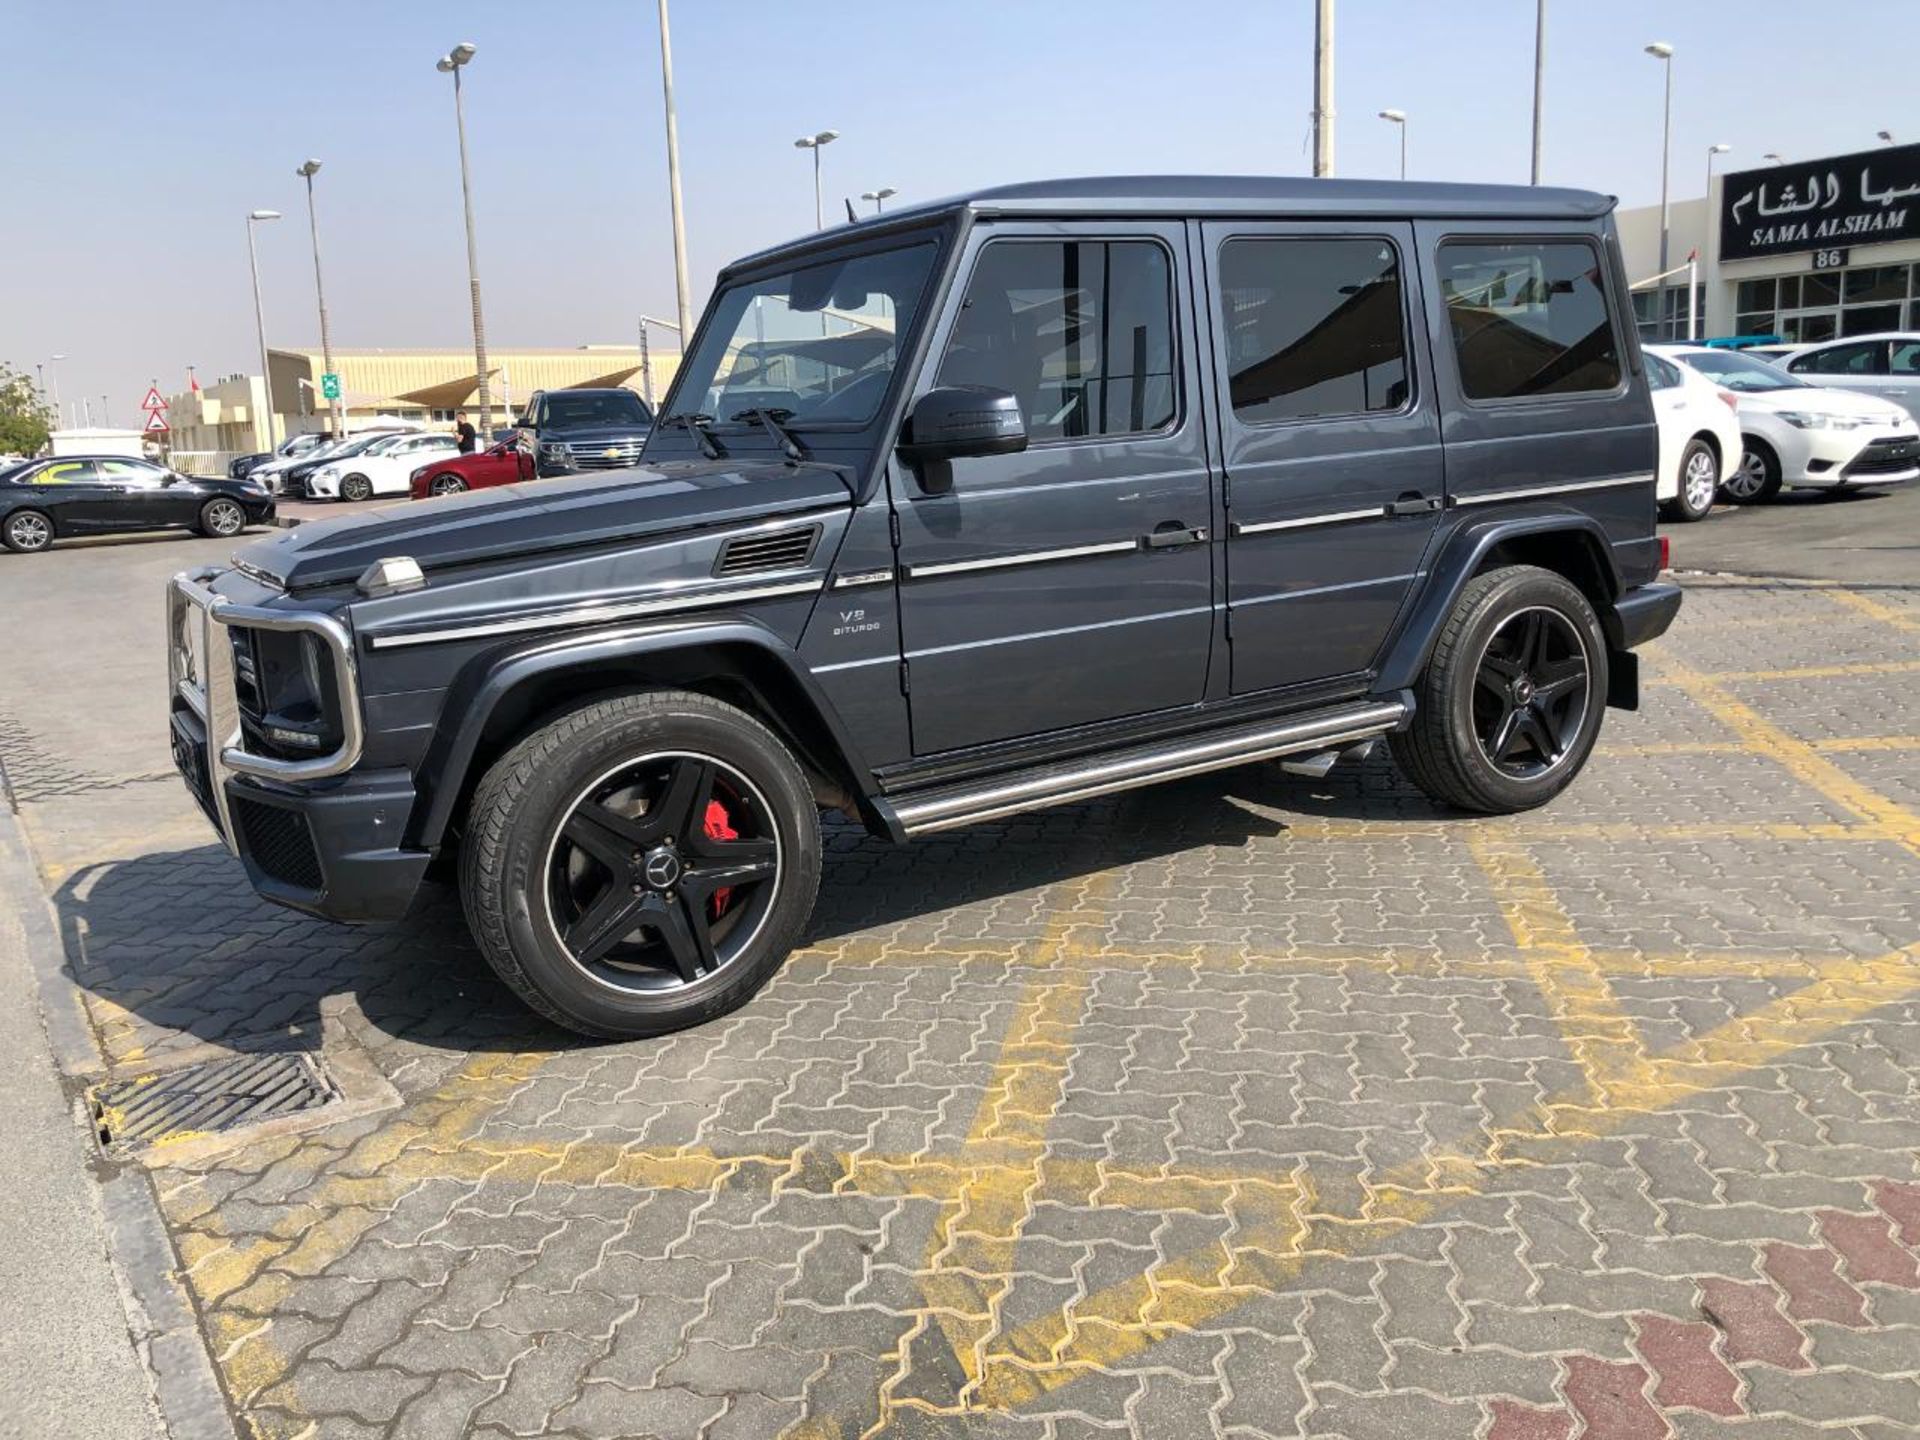 2014 Mercedes G63 65,000 km Service history Dark charcoal grey With 2 tone interior - Image 2 of 6